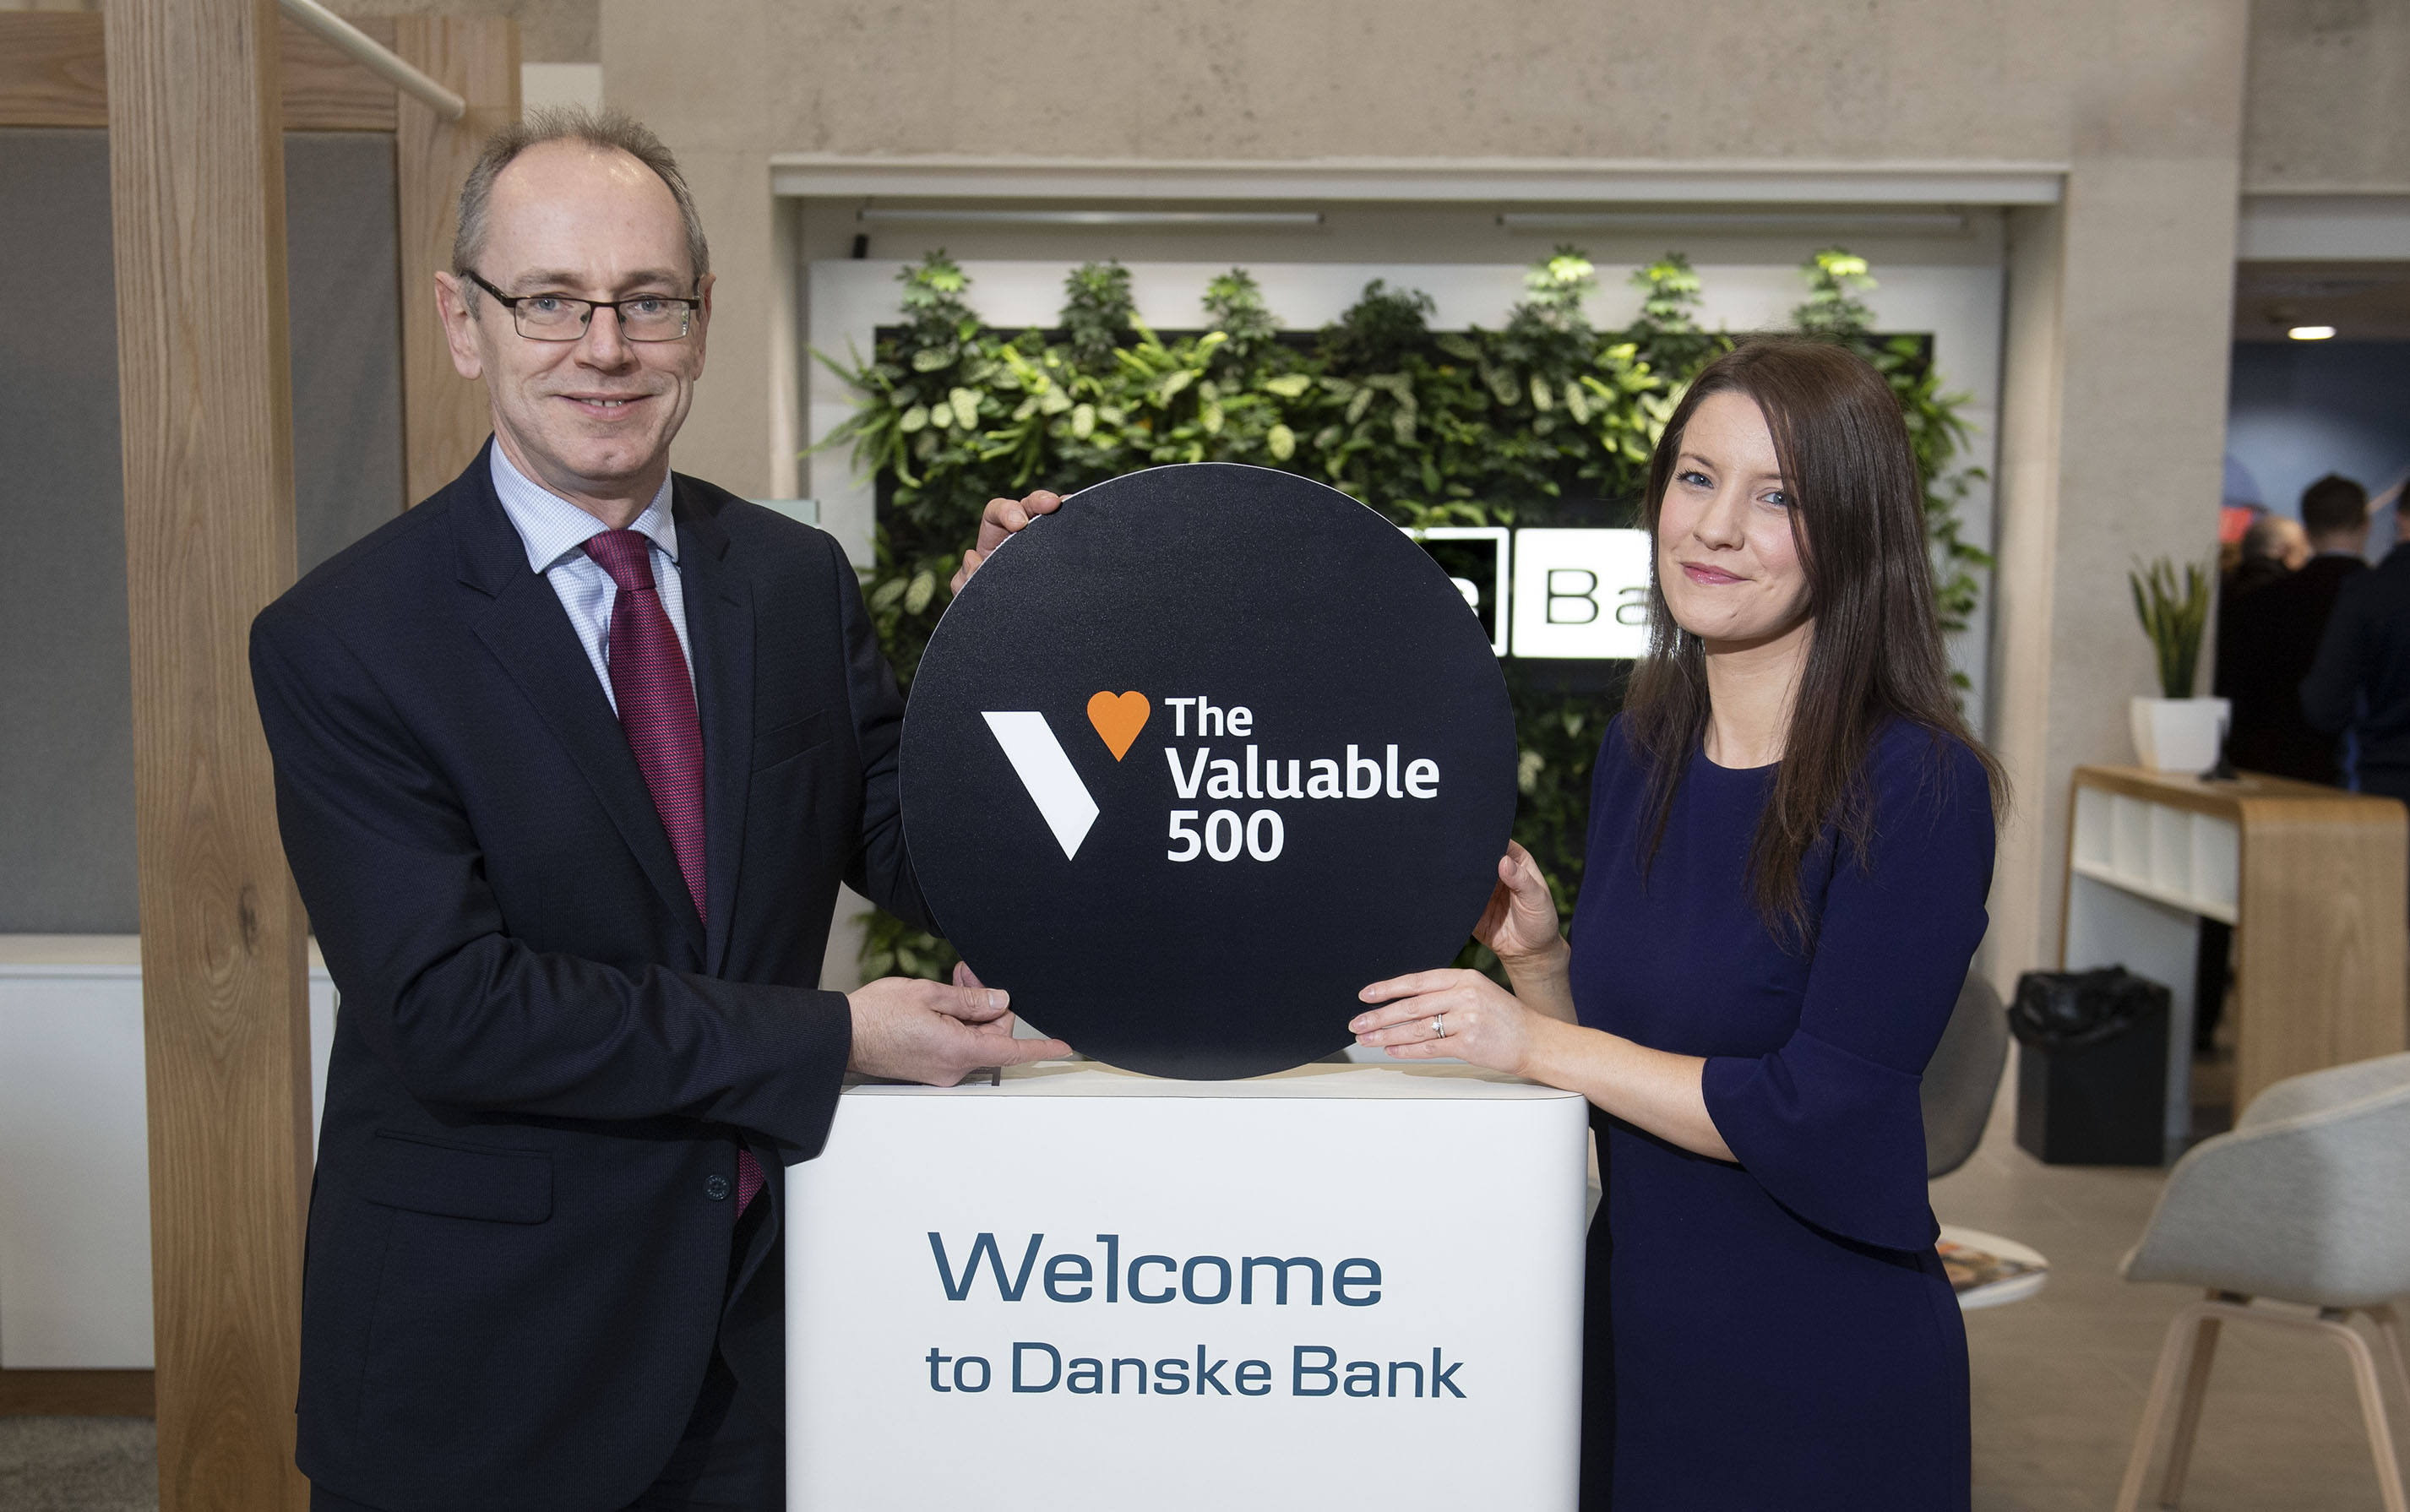 A man and woman stand inside. They're holding a circle board that says 'The Vaulable 500' above a stand that says 'Welcome to Danske Bank'.